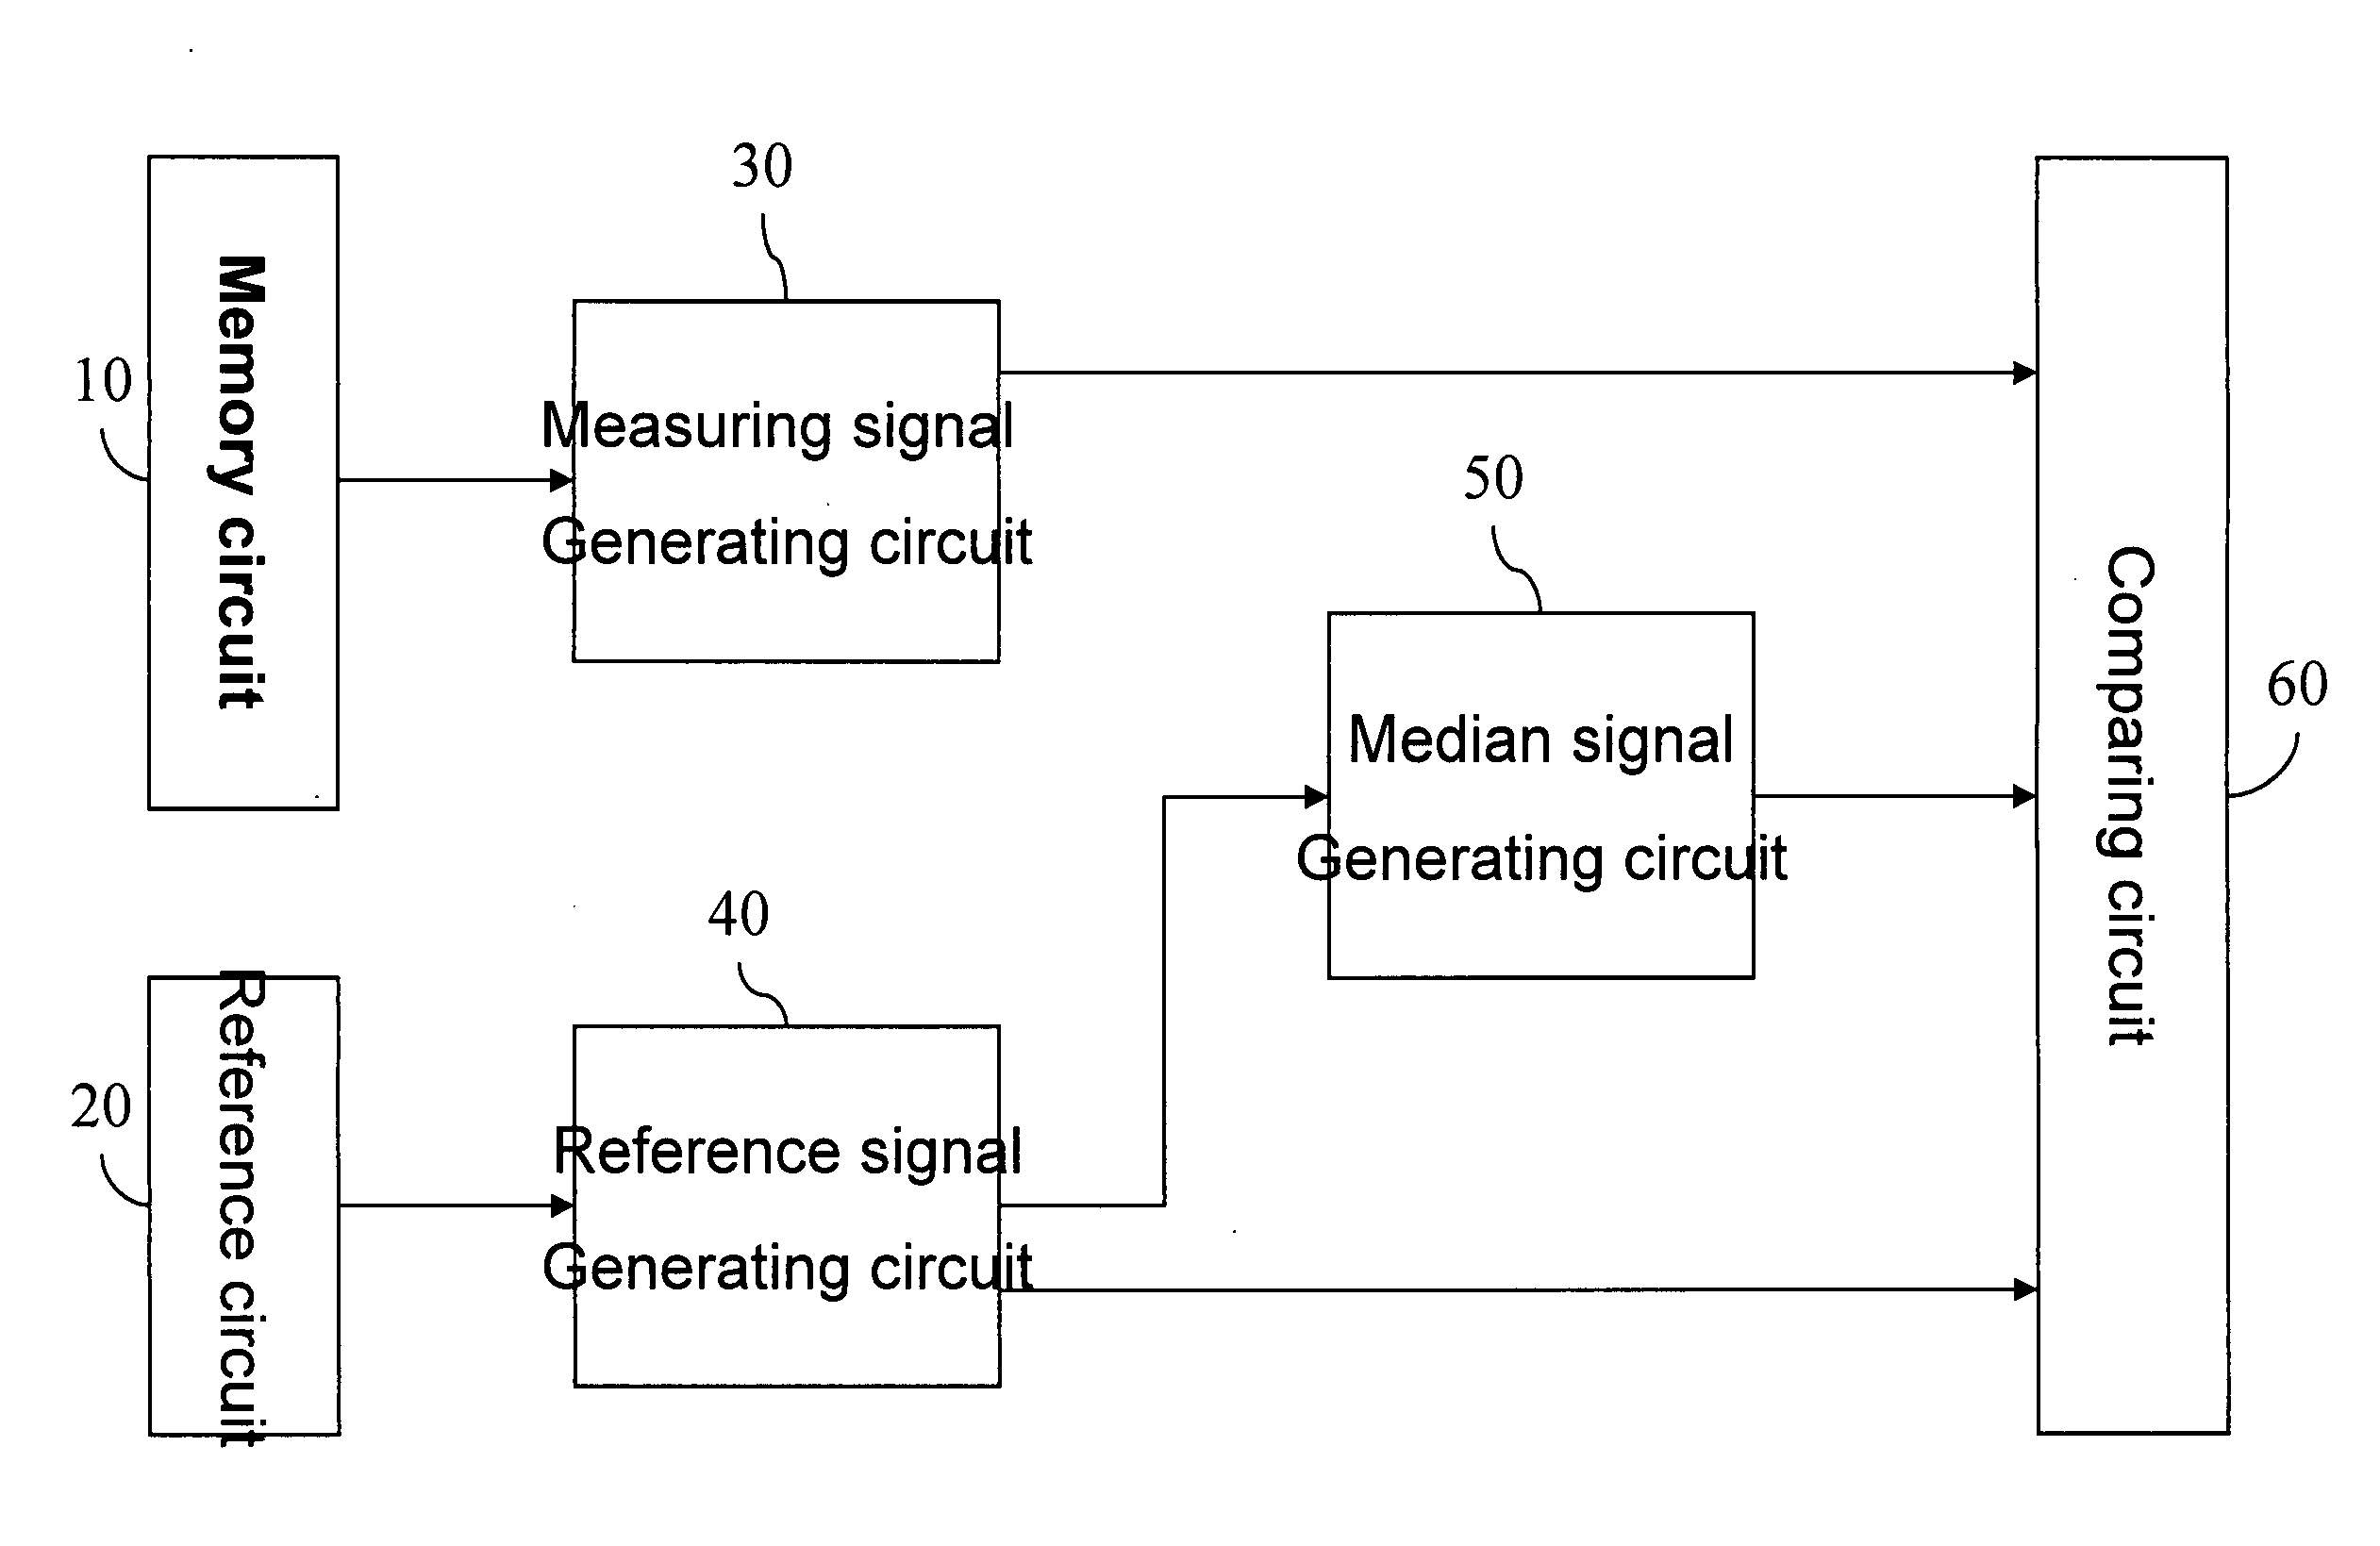 Memory accessing circuit and method